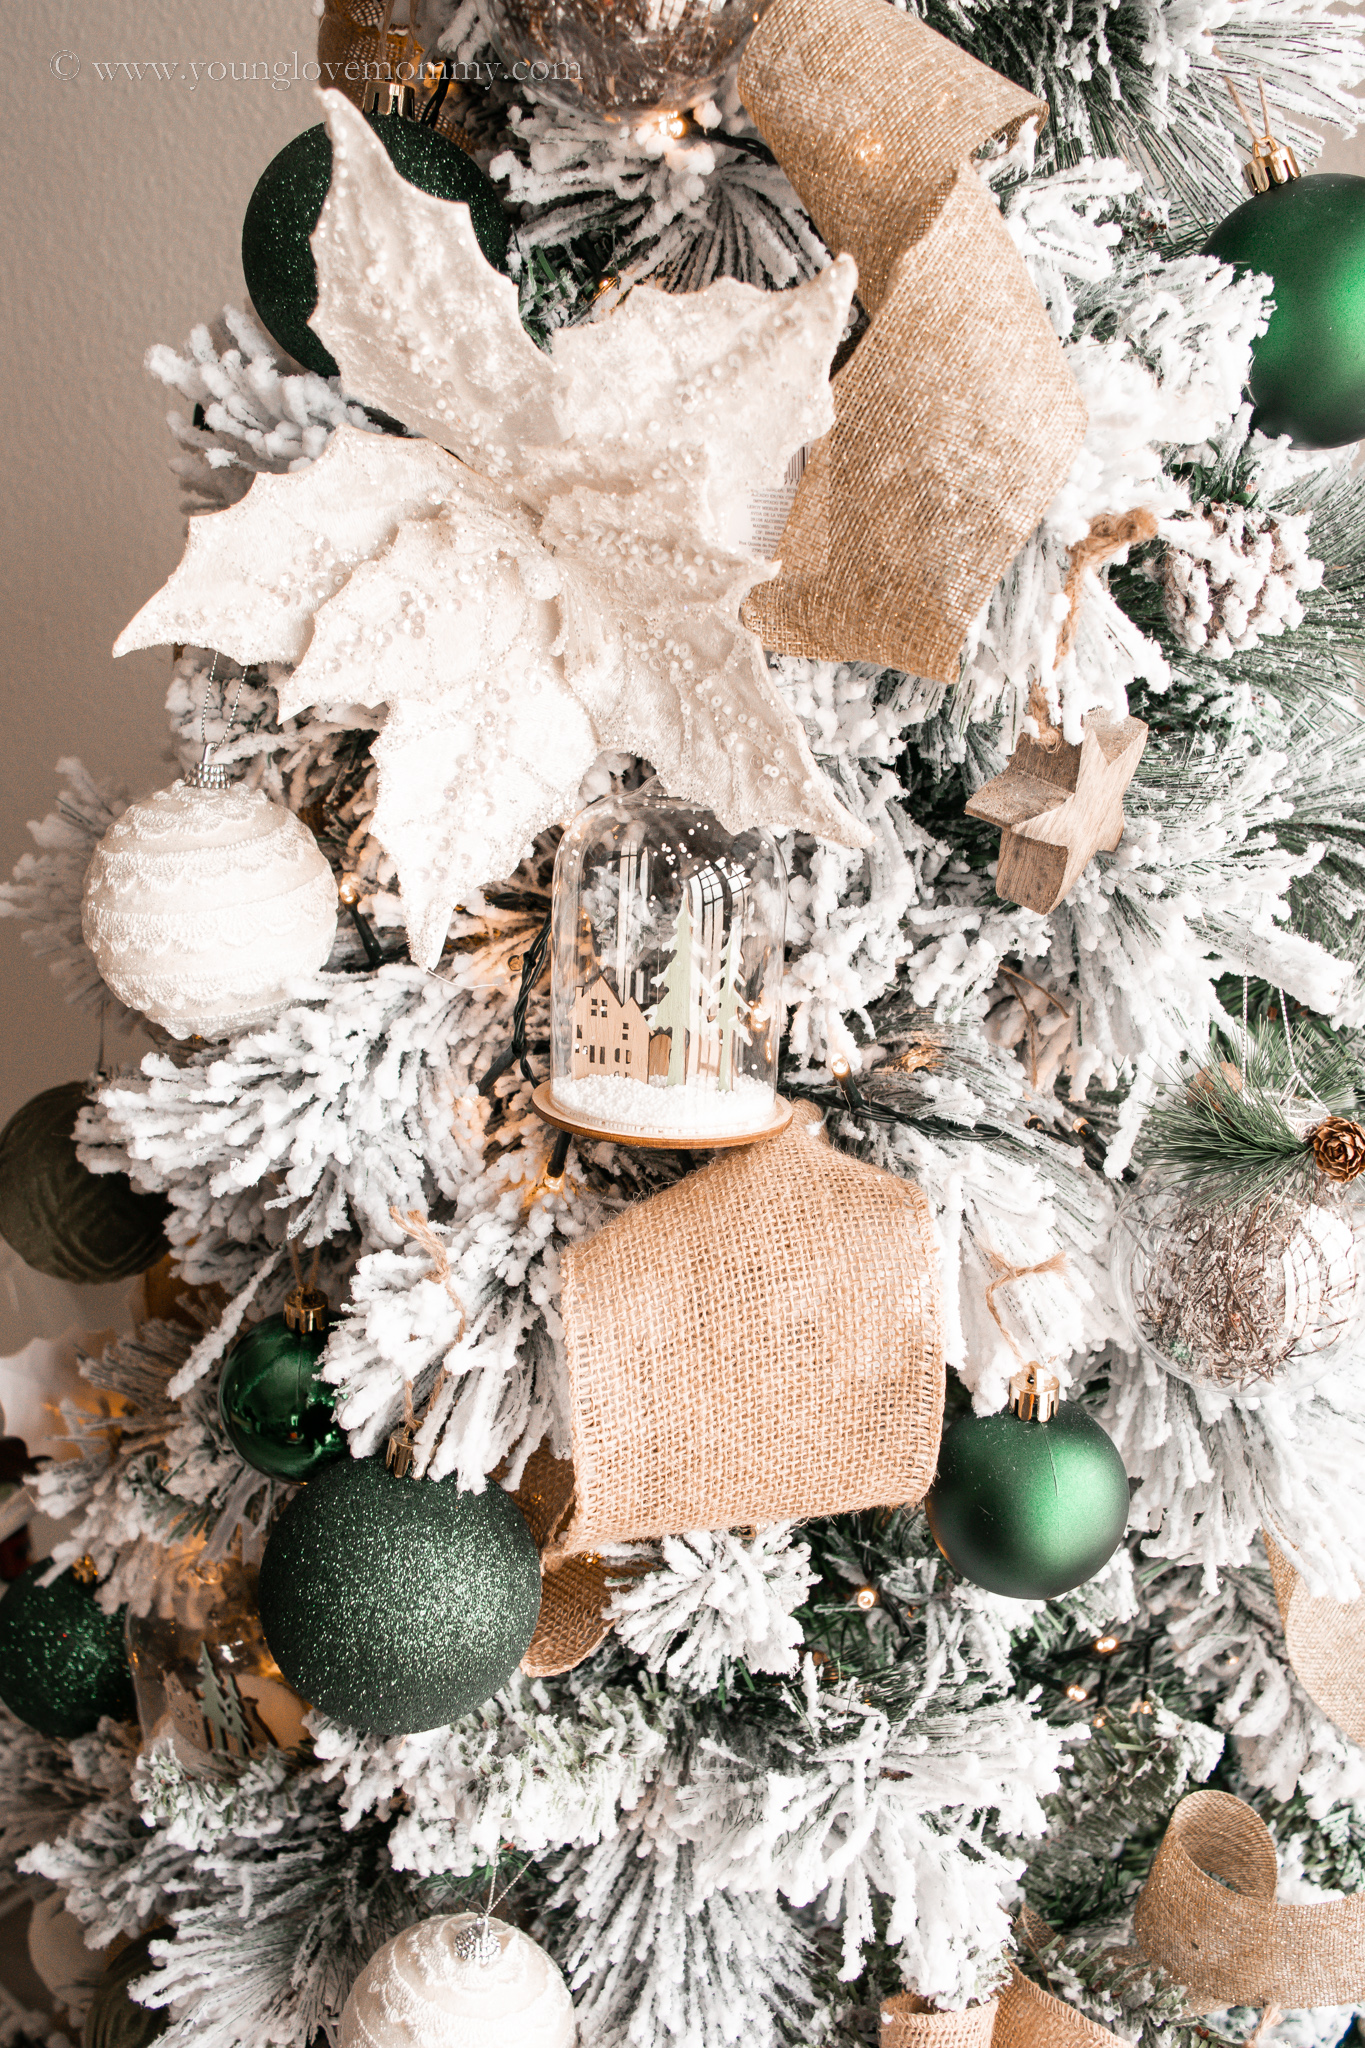 Our Nature Inspired Christmas Tree | Young Love Mommy